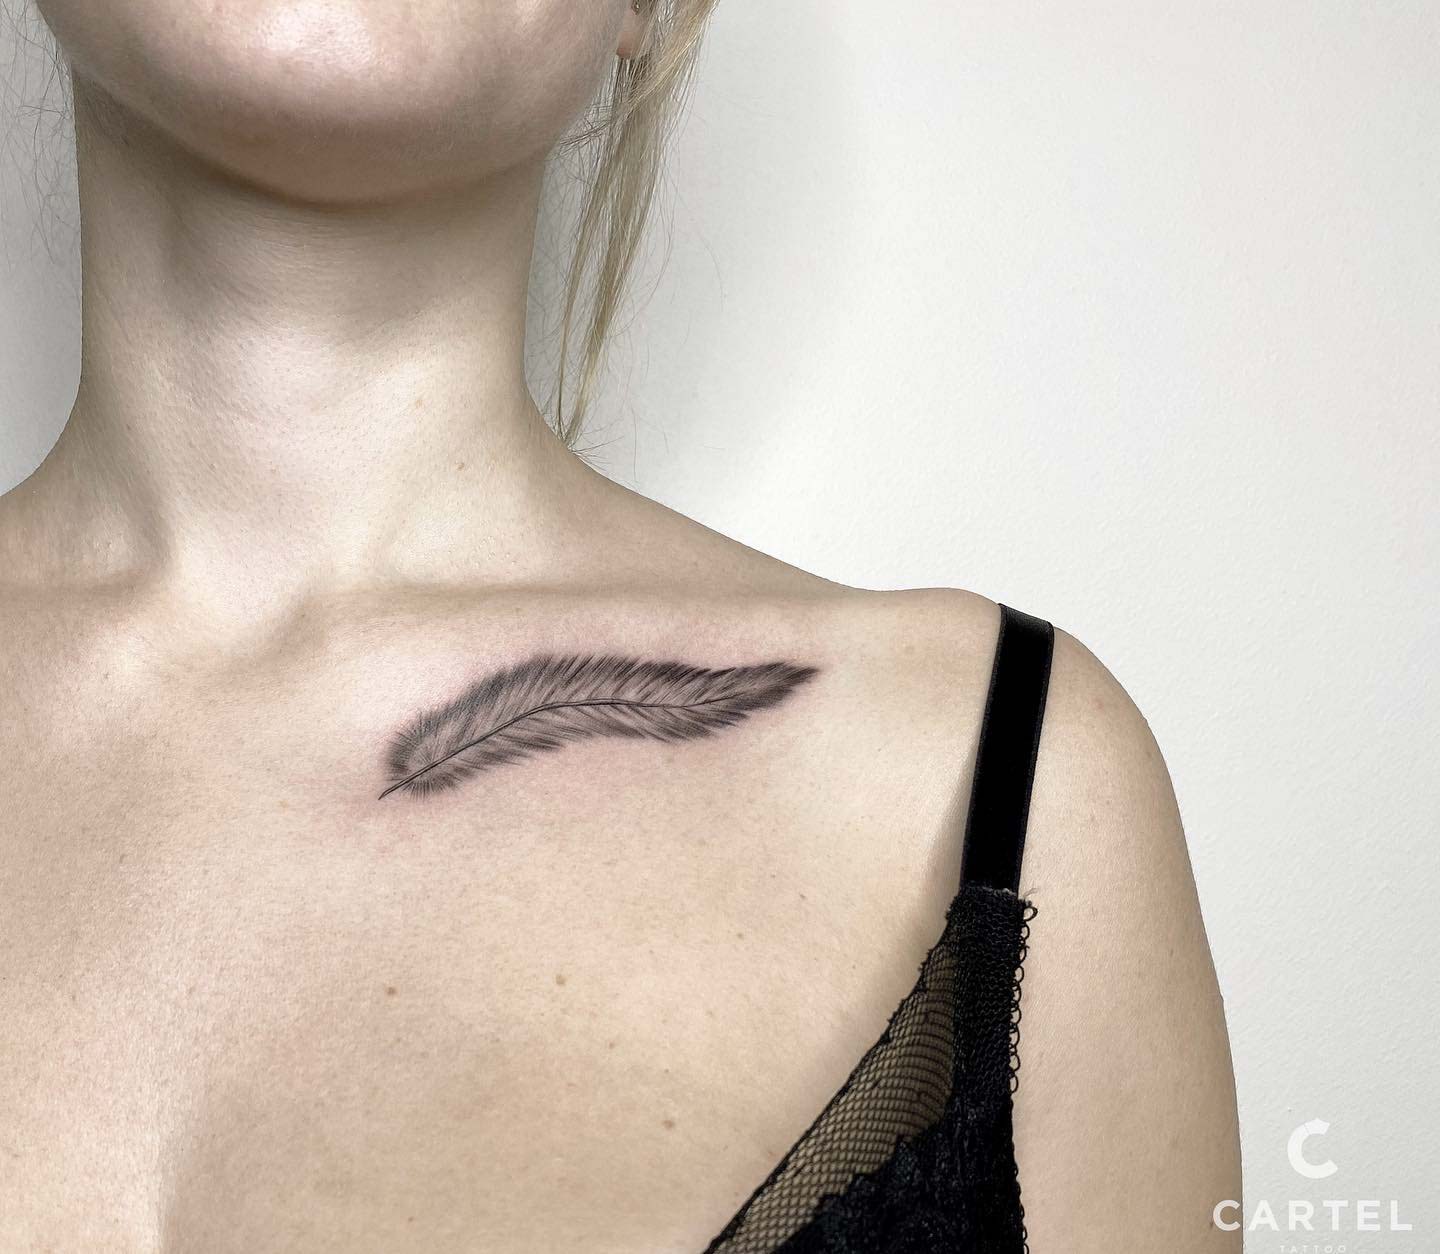 11 Snake Collarbone Tattoos To Get Wrapped Up In • Body Artifact